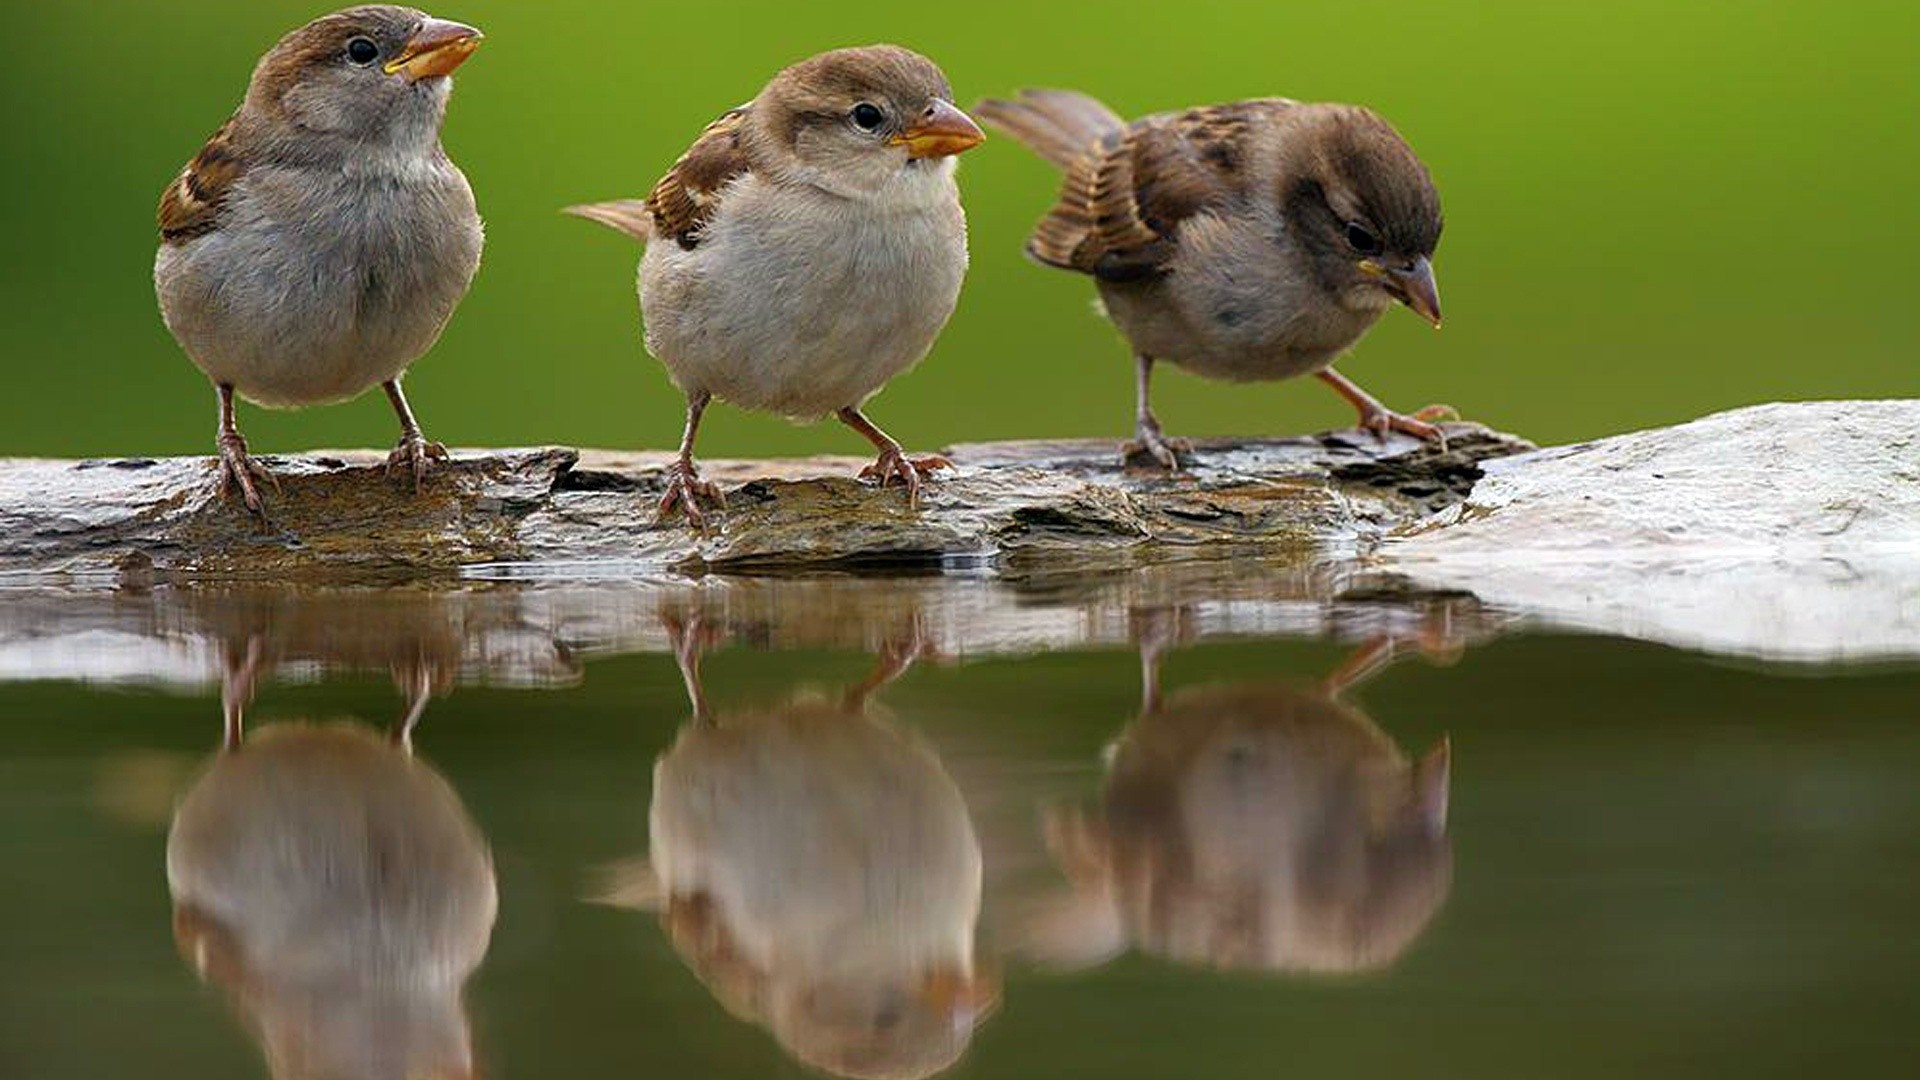 Cute Sparrows Drinking Water | HD Wallpapers